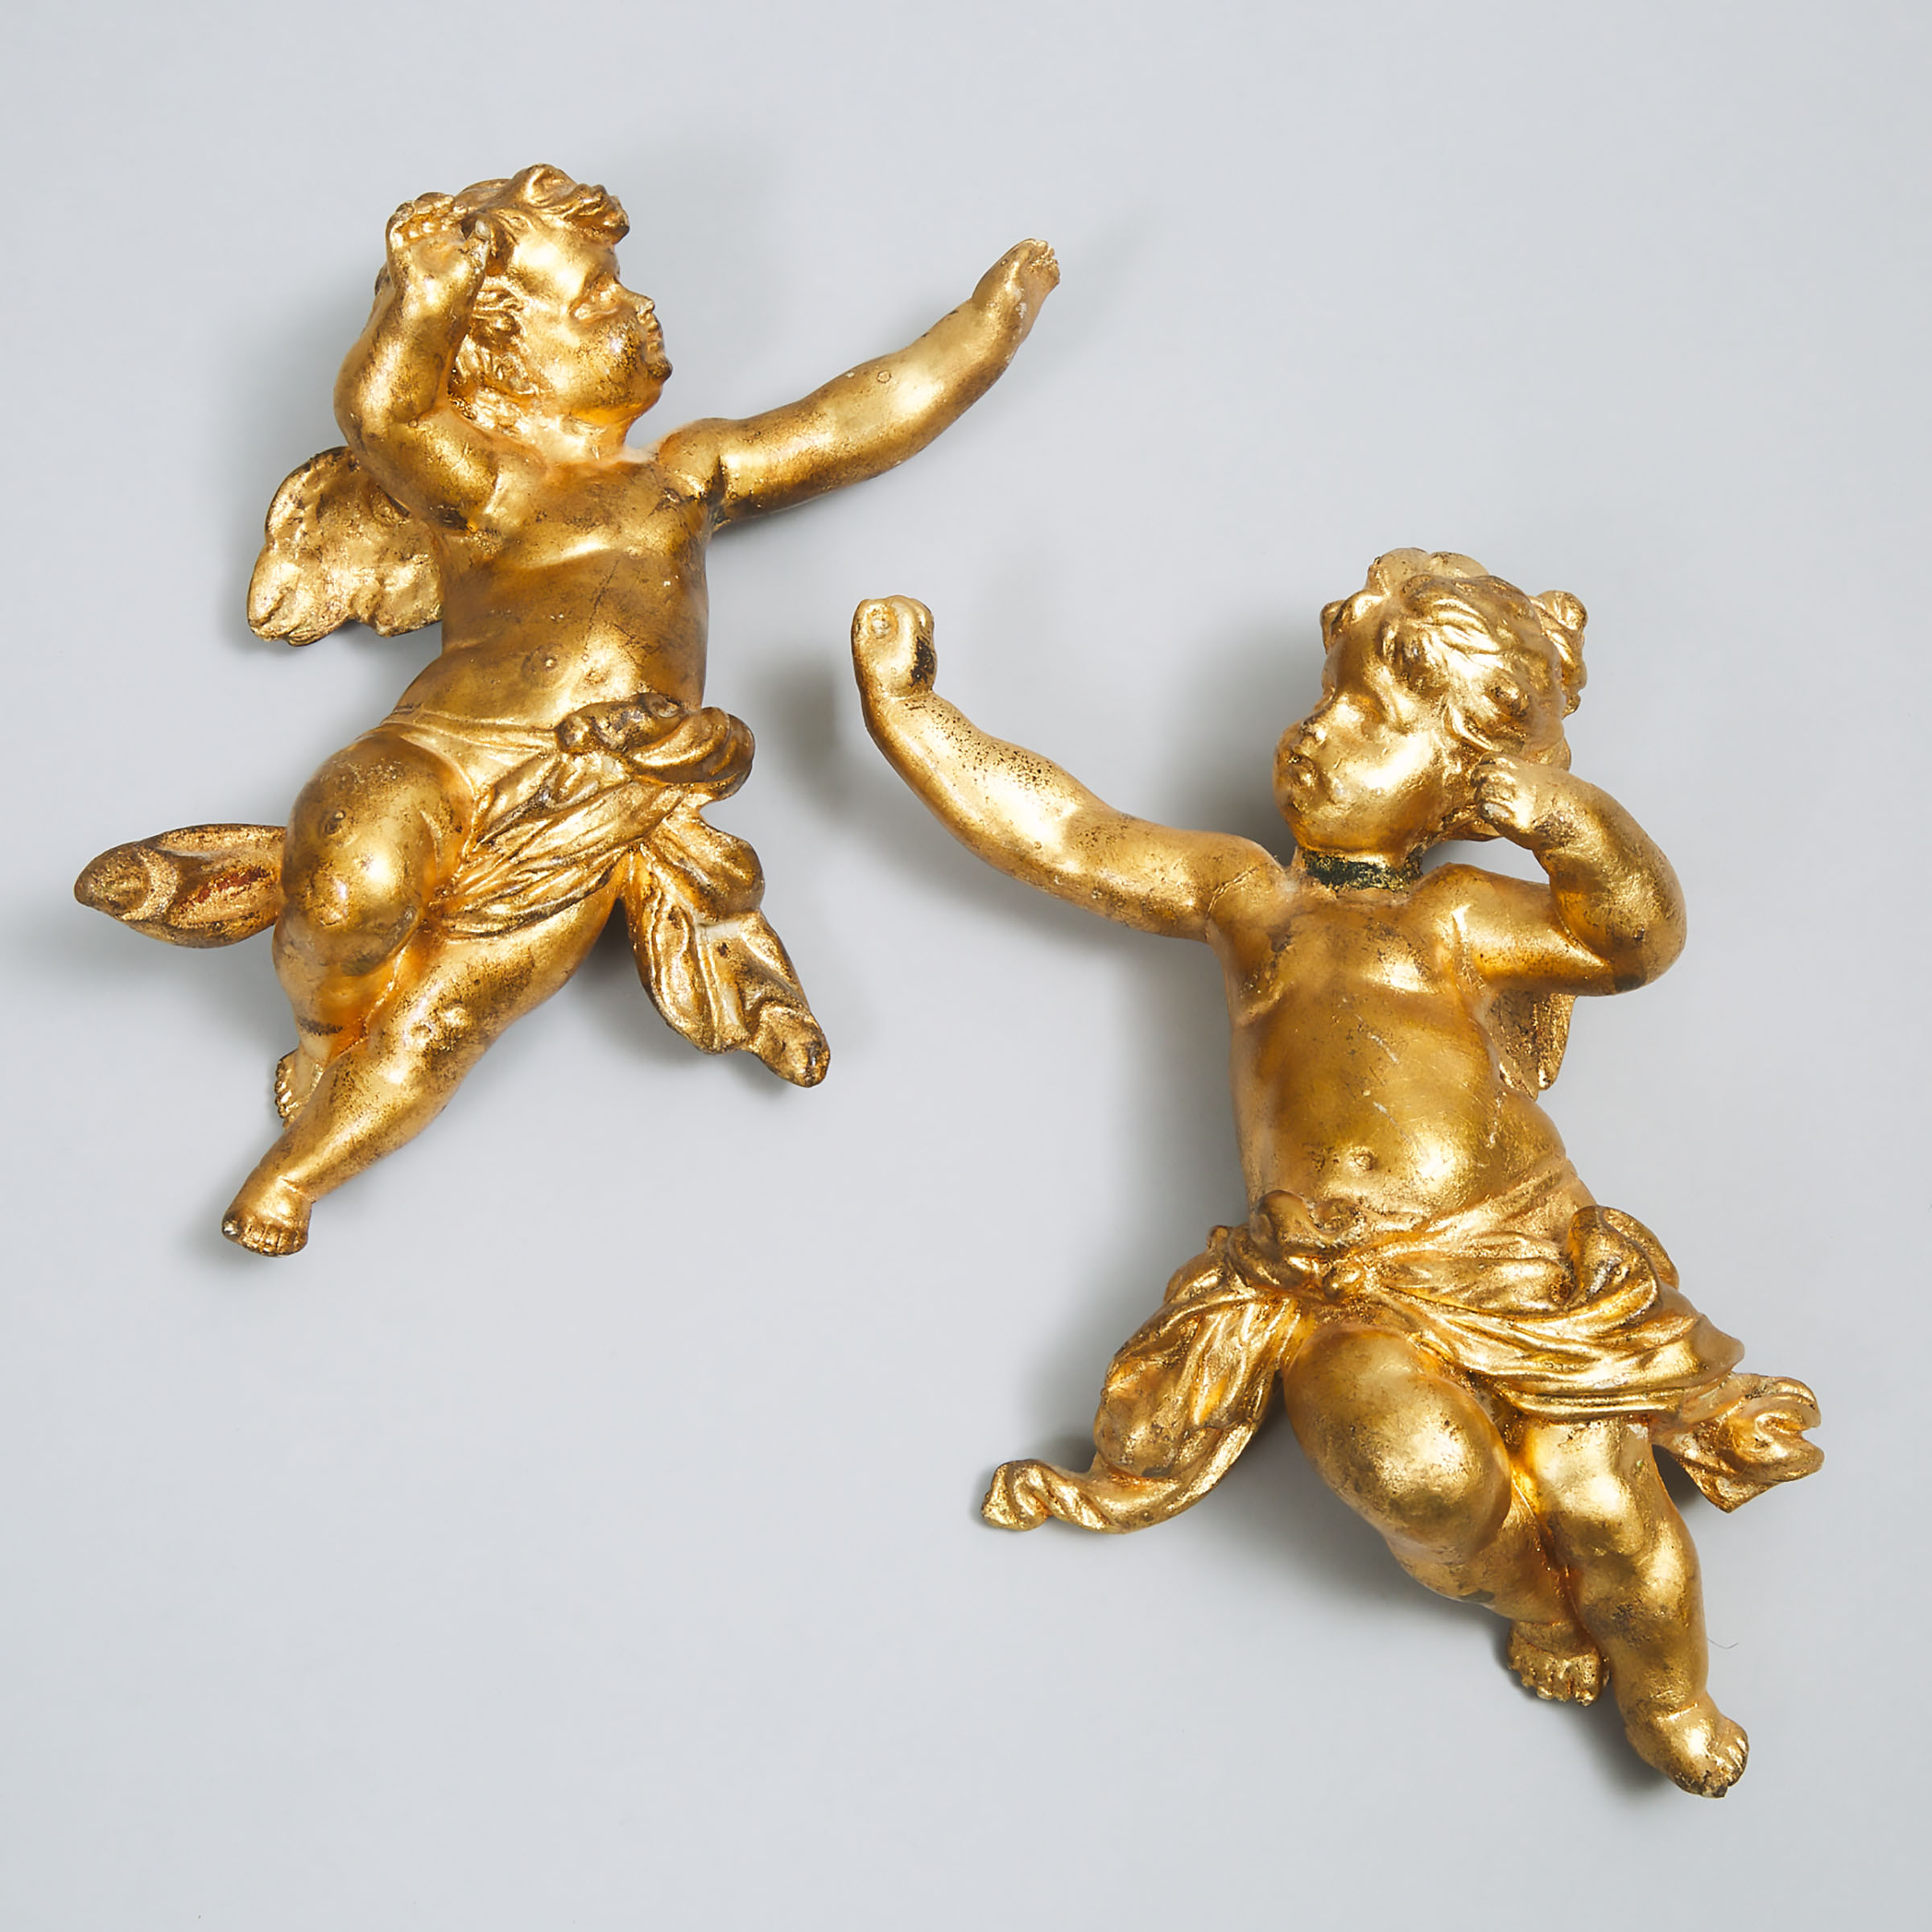 Pair of Continental Gilt Composite Figures of Cherubic Angels, 19th/20th century